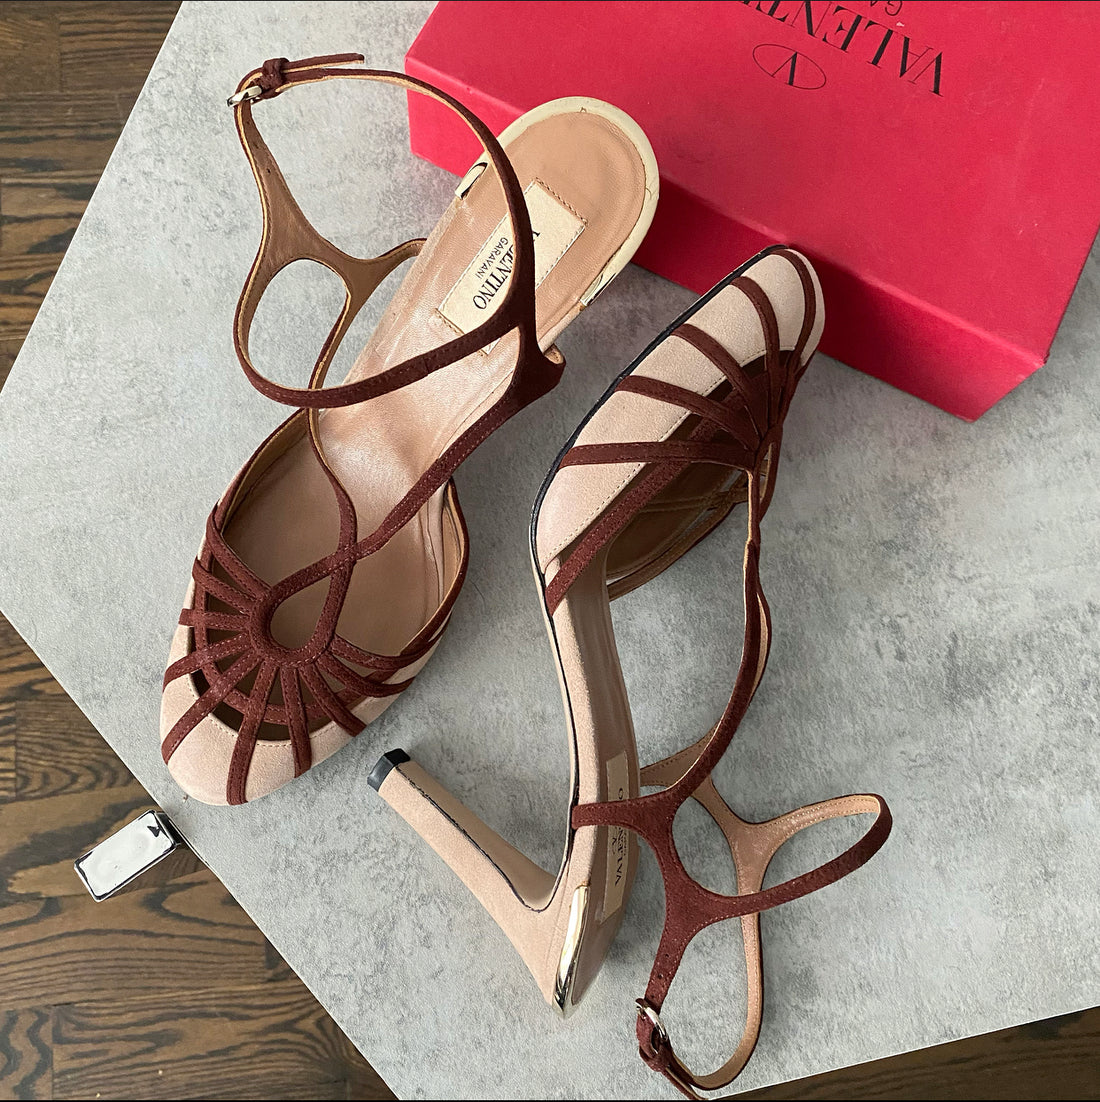 Valentino Brown and Taupe Two-Tone Suede Heels - 38.5 / 8.5